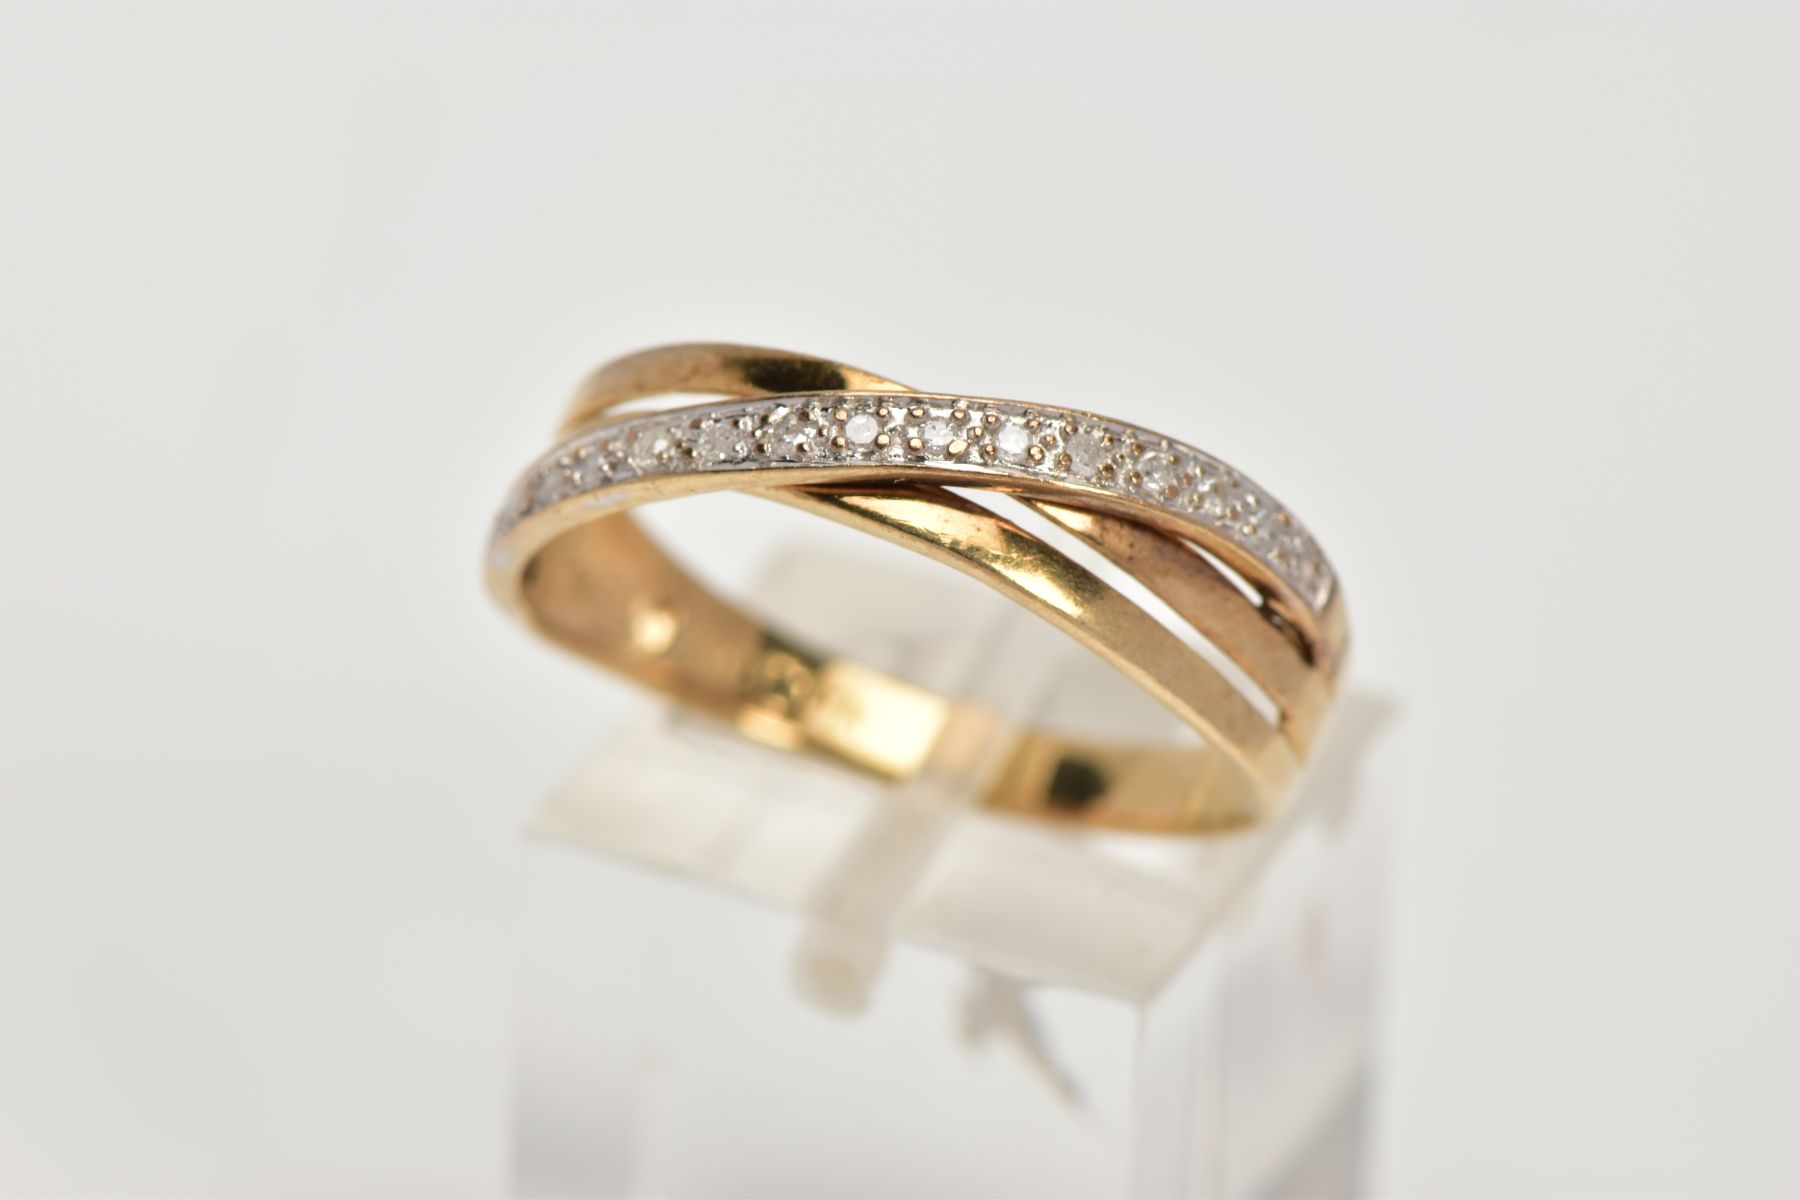 A 9CT GOLD DIAMOND CROSSOVER RING, designed with a row of single cut diamonds, hallmarked 9ct gold